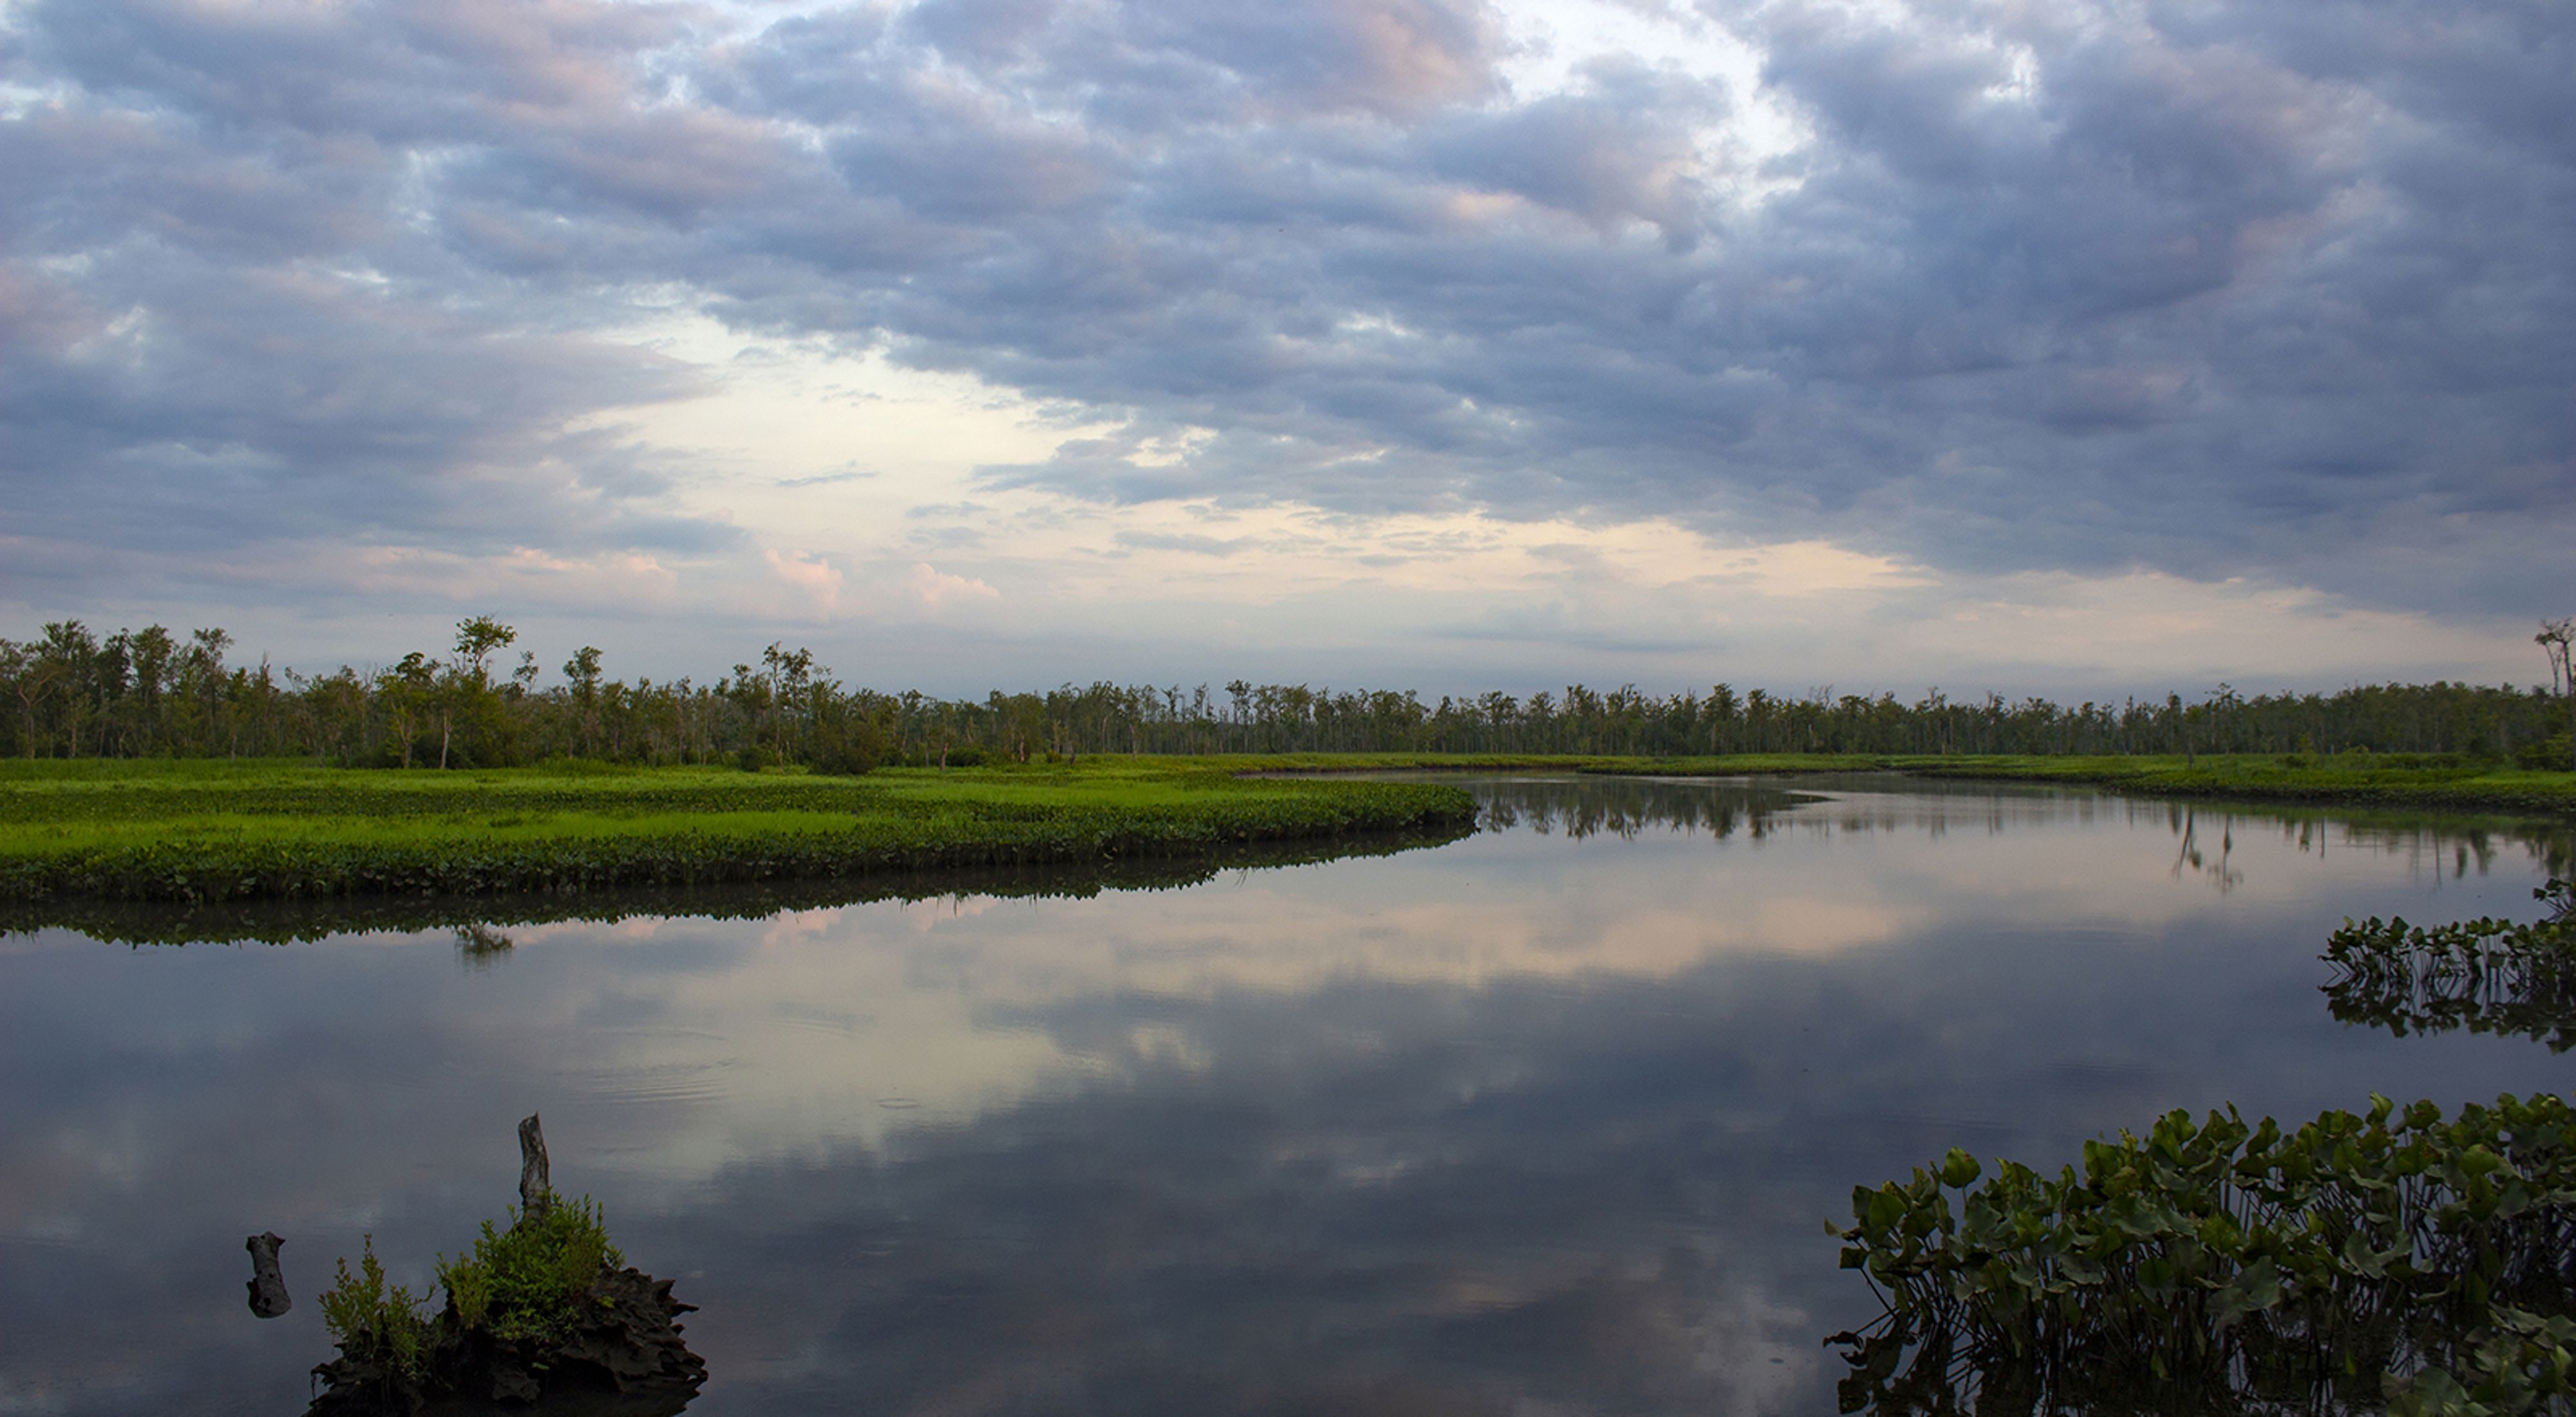 Low morning clouds are reflected in the still water of a creek that winds through green wetlands.